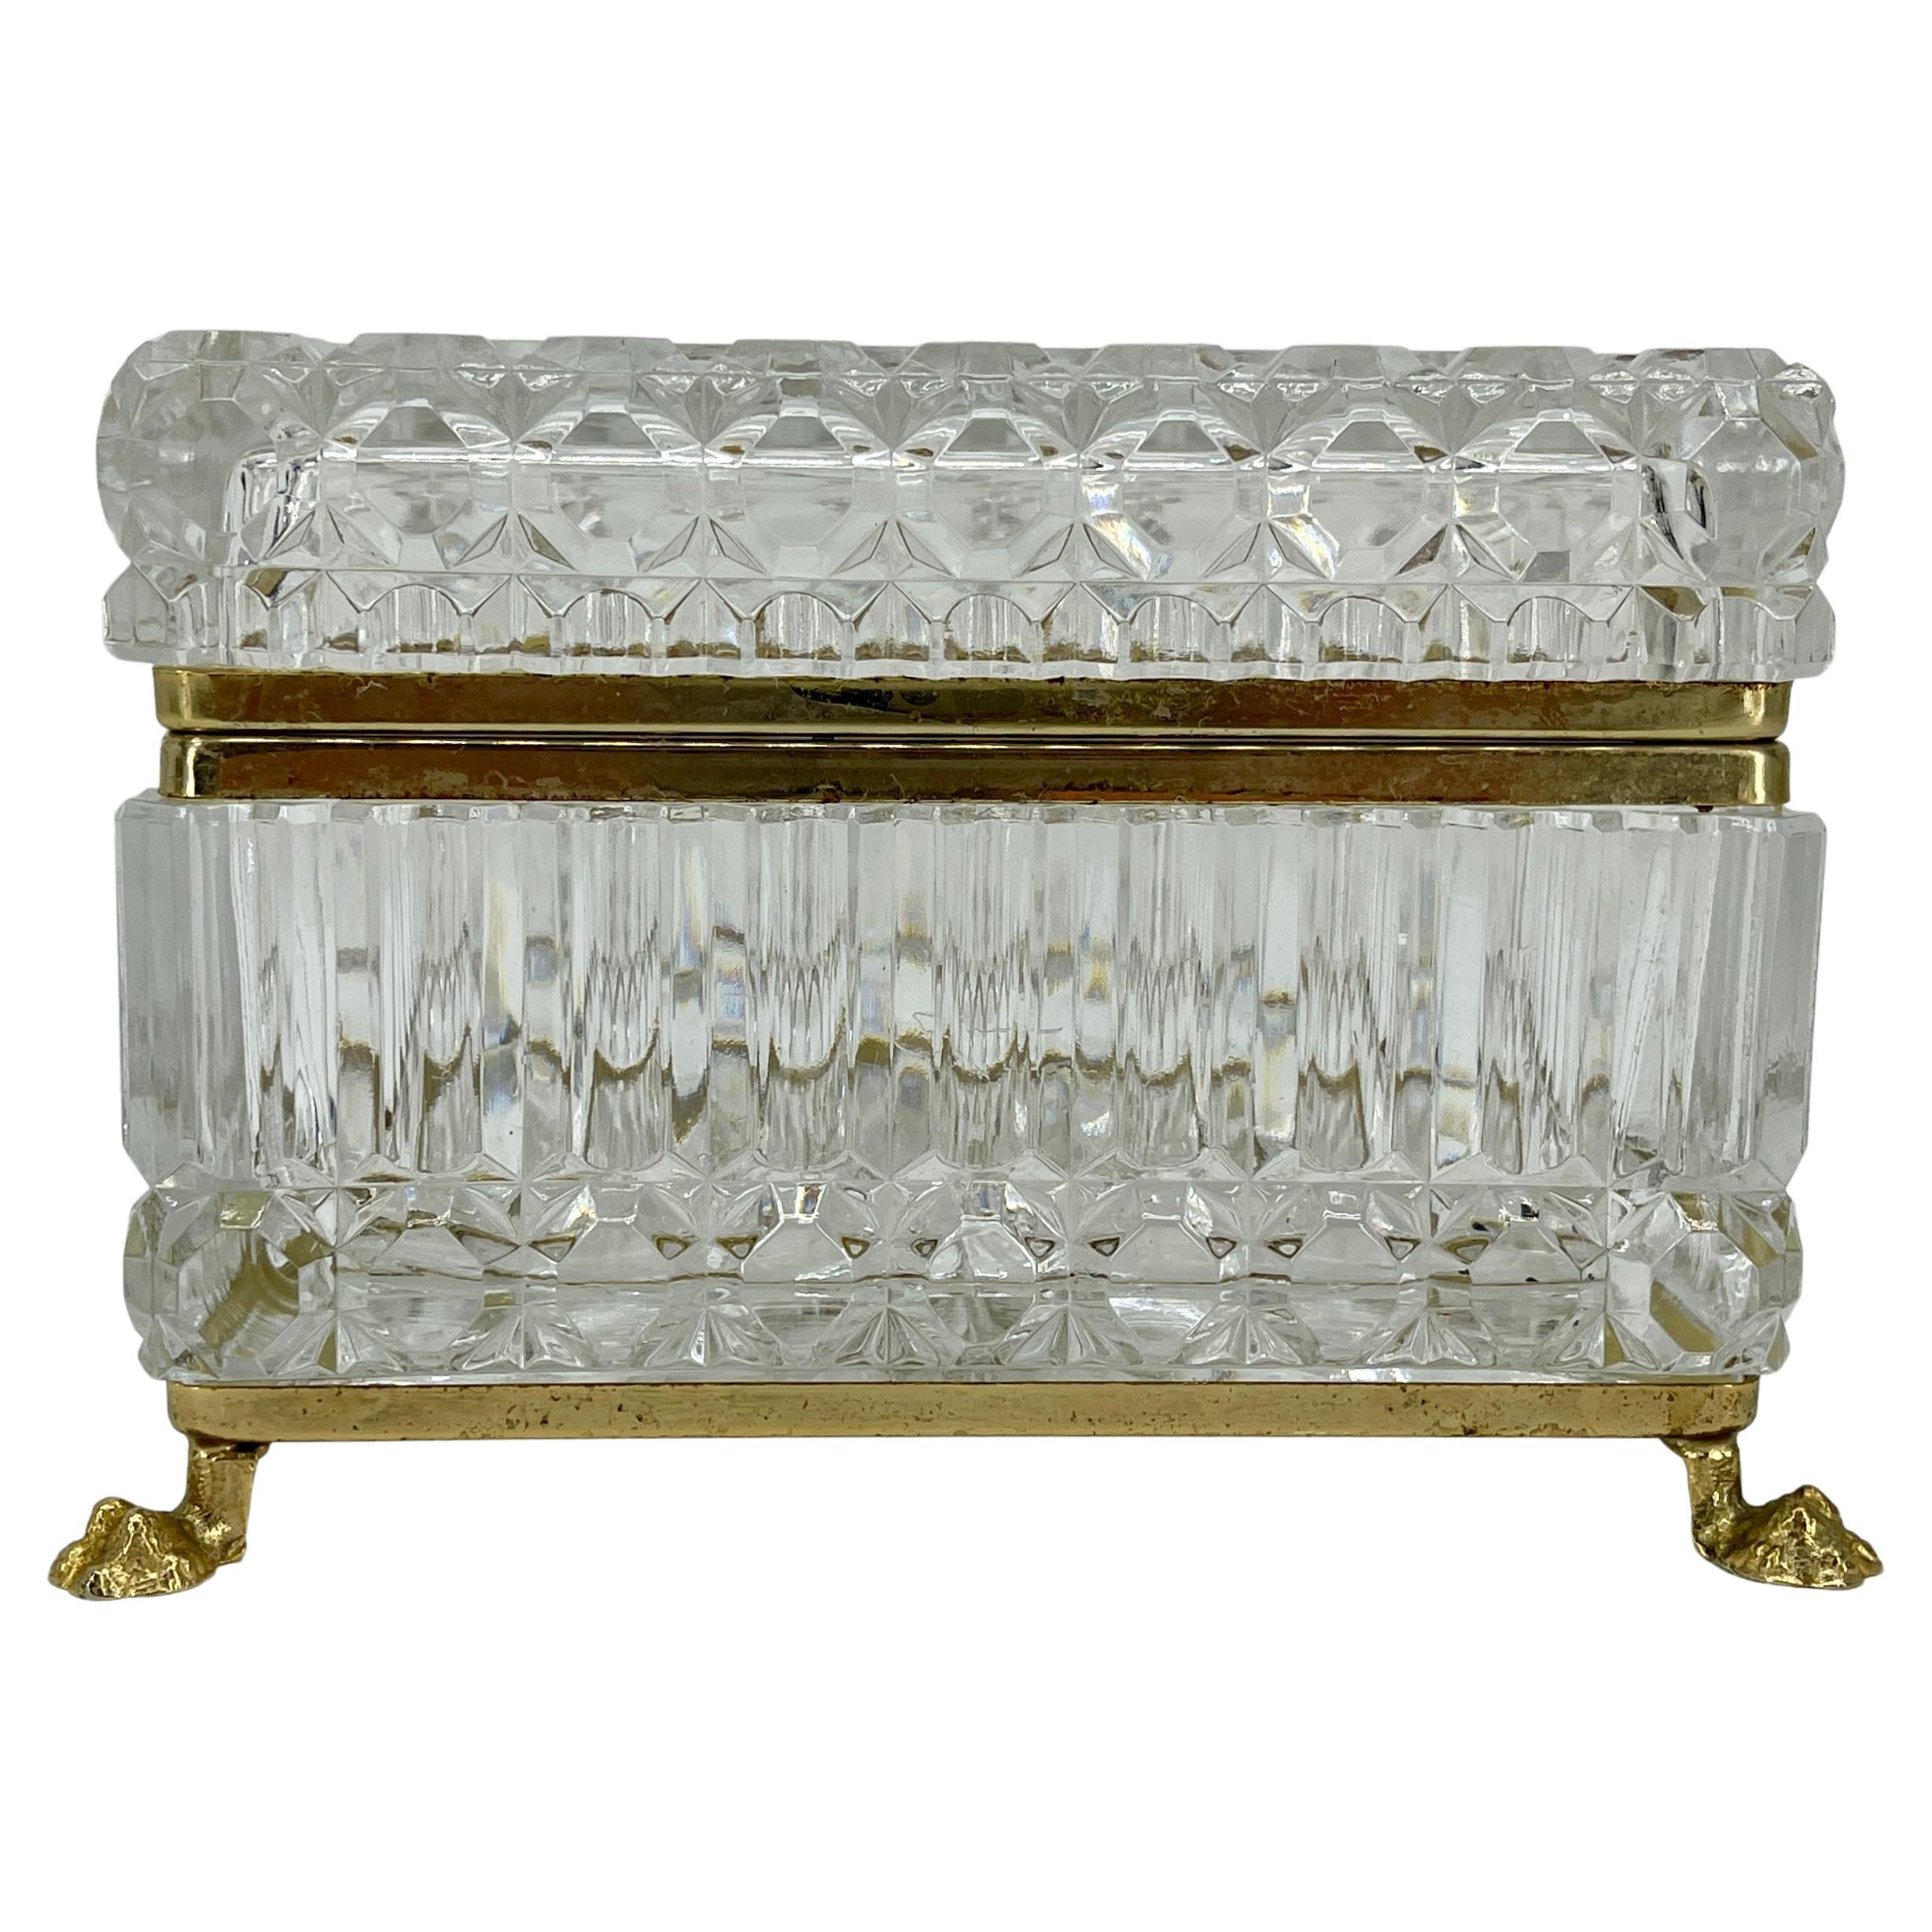 Faceted Antique French Cut Crystal and Brass Jewelry Box, Vanity Box or Candy Dish